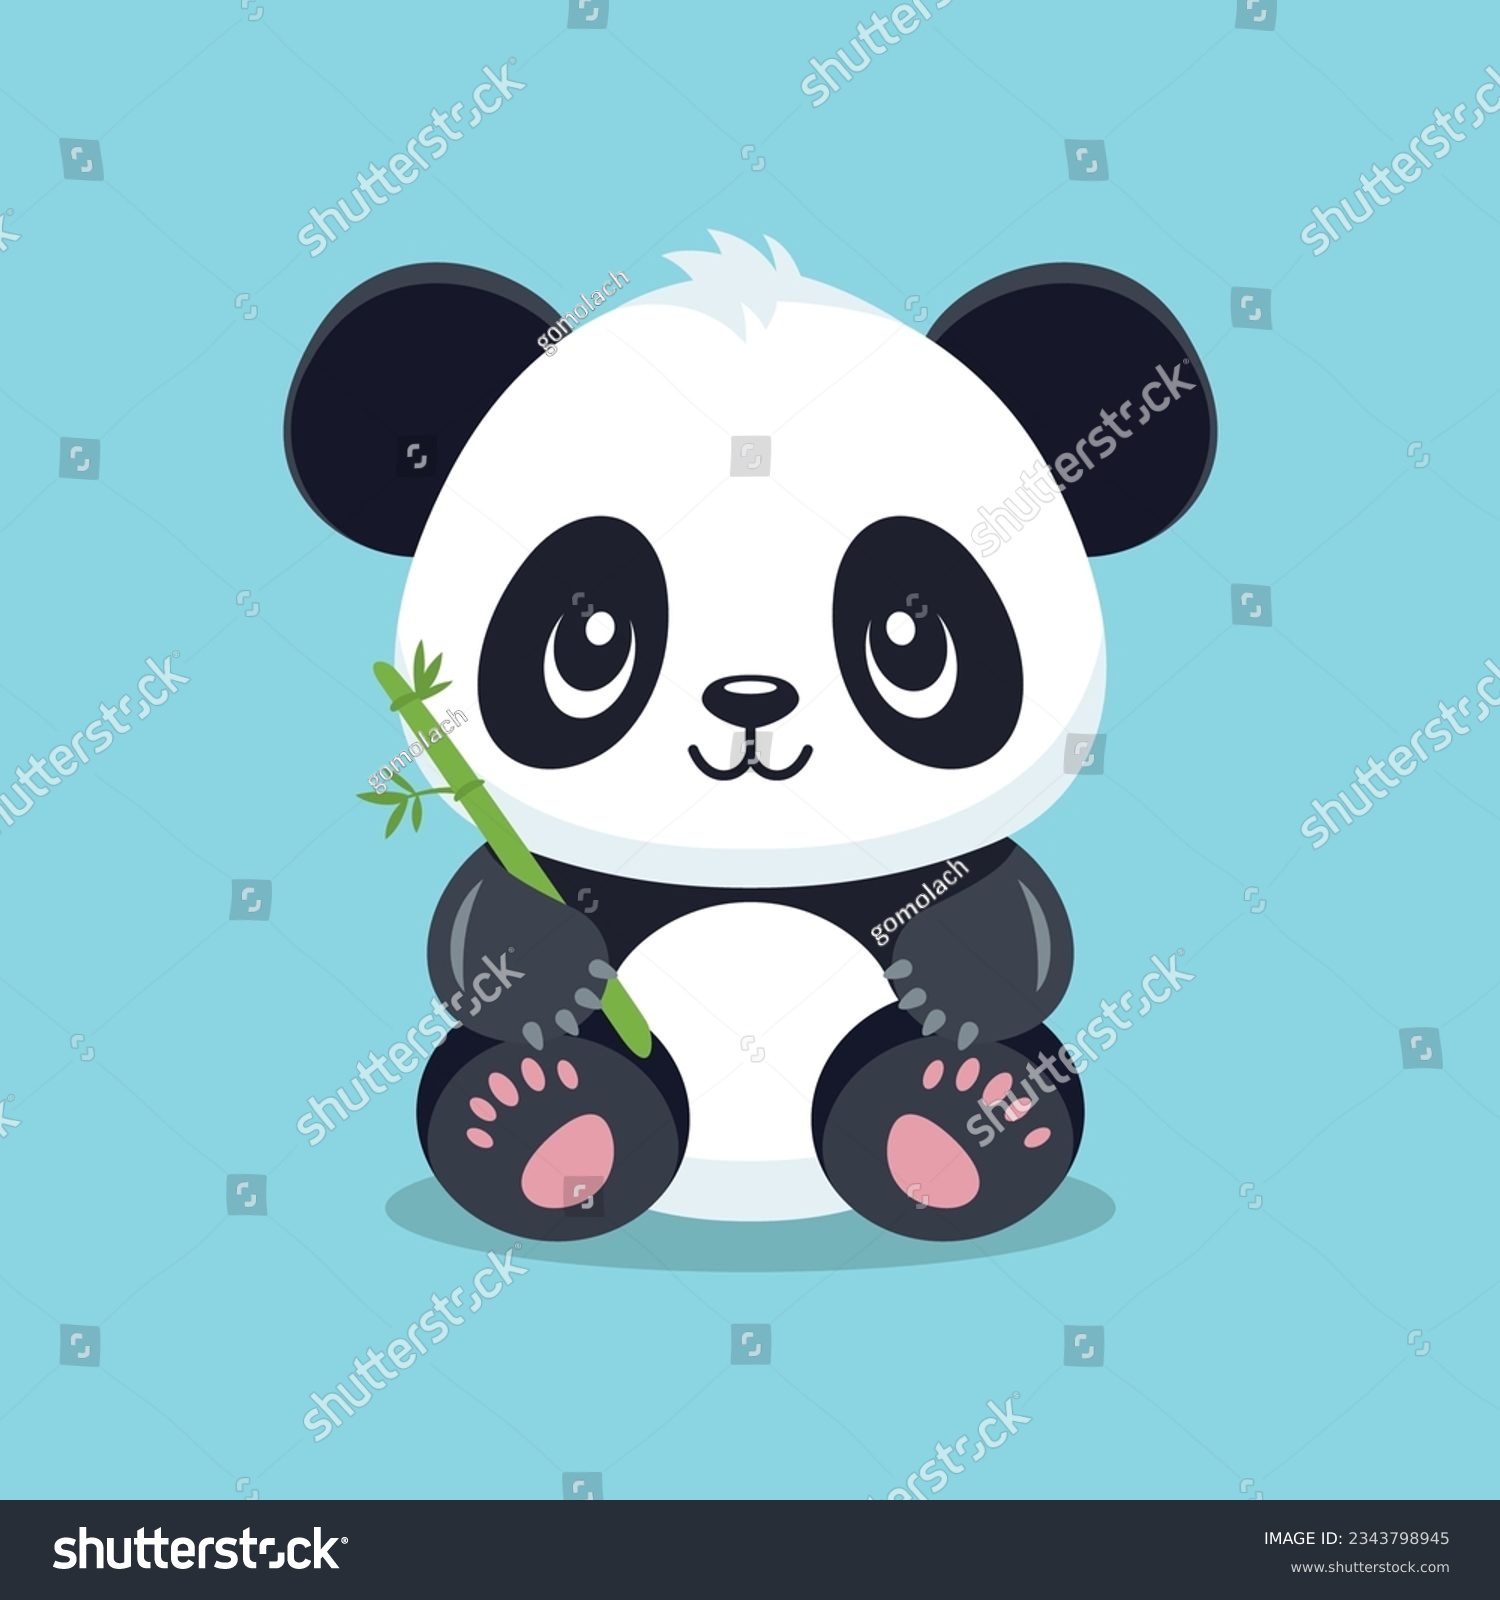 SVG of Flat Vector Cute Cartoon Panda Character with Bamboo. Funny Smiling Sitting Panda Bear in Front View svg